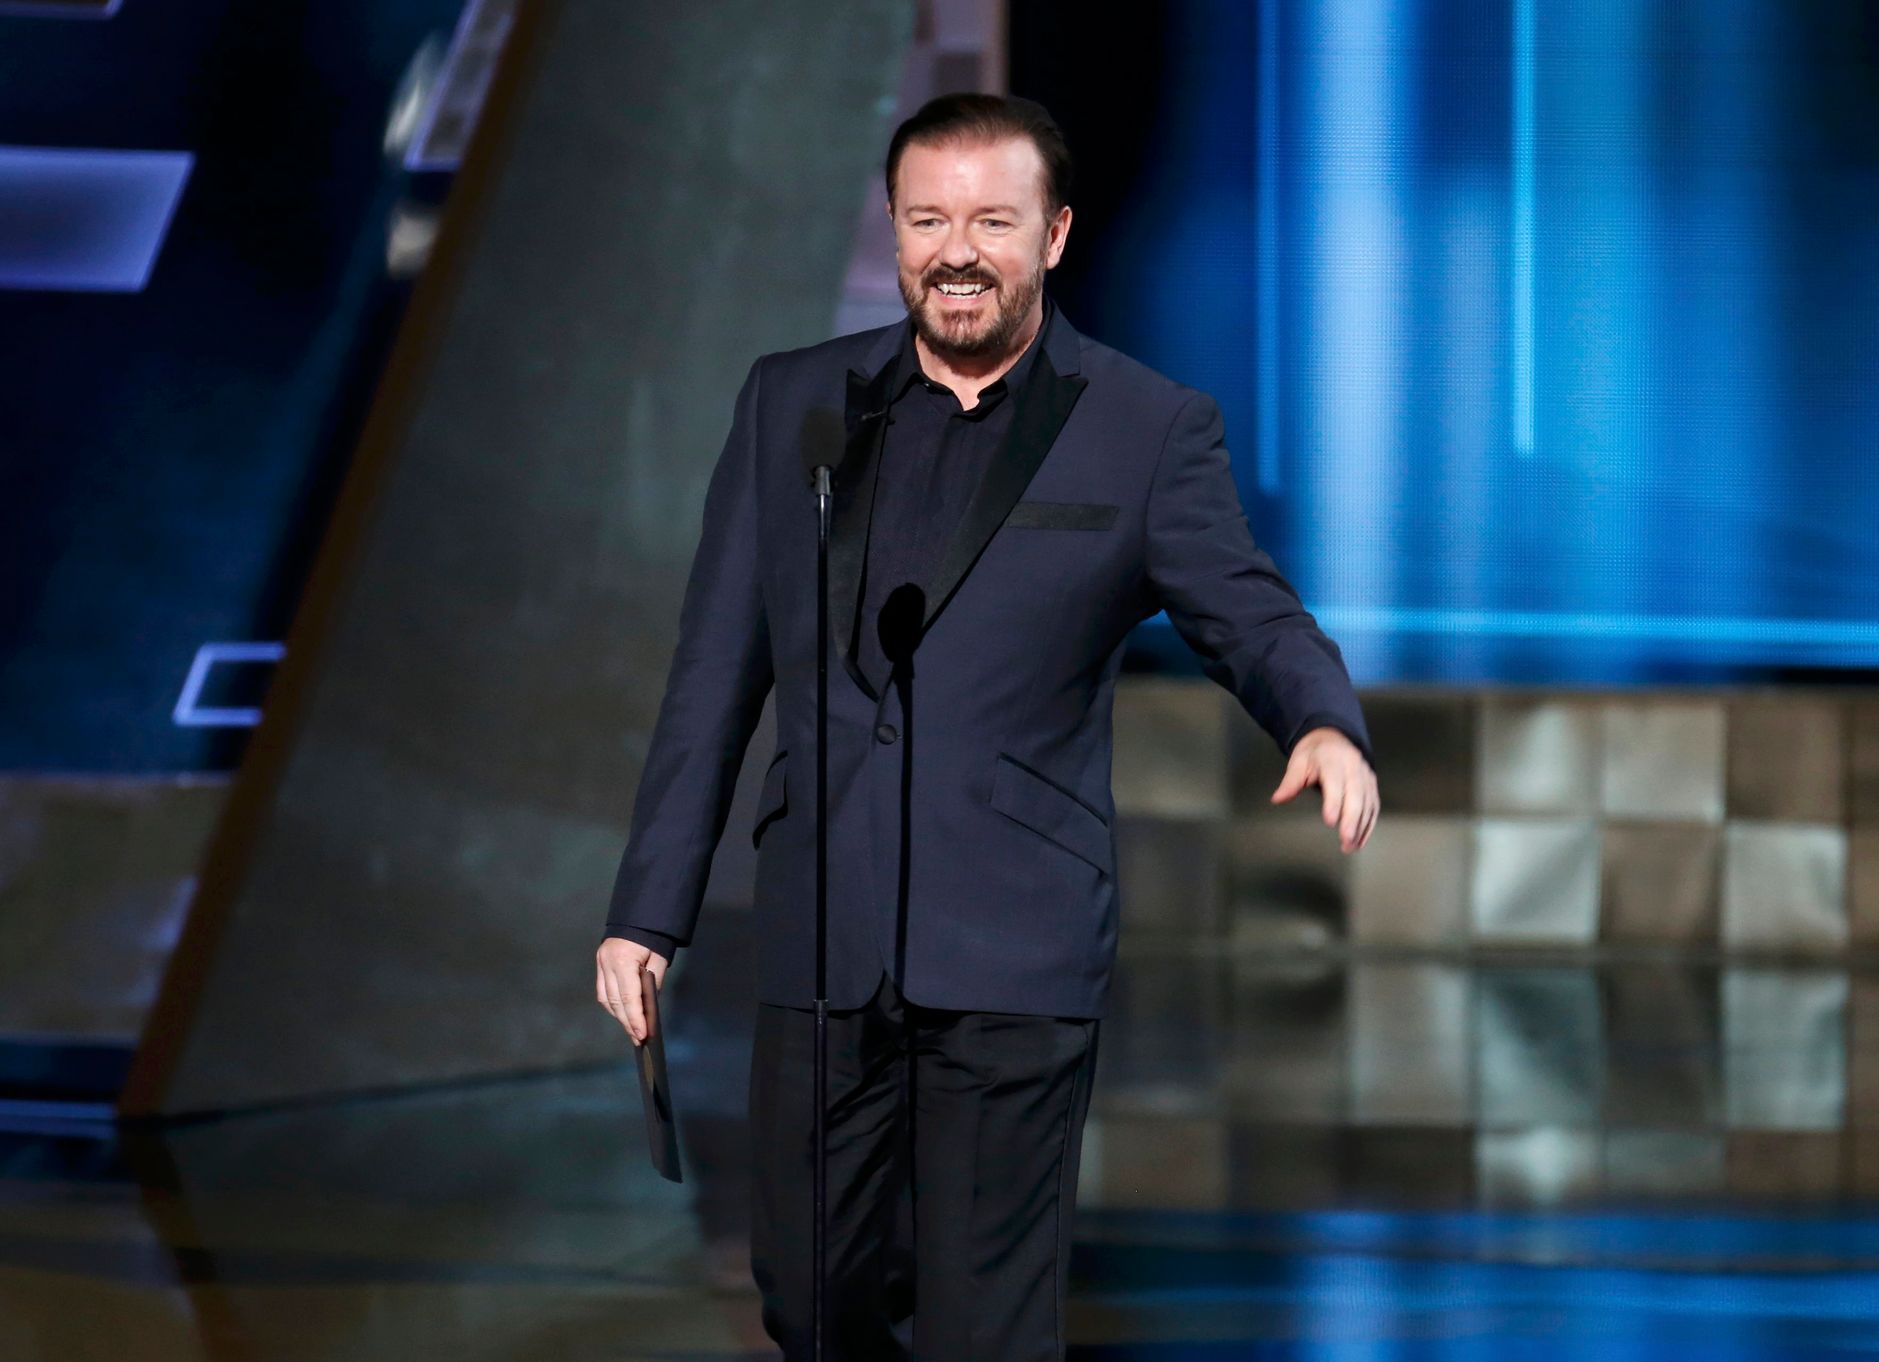 Presenter Ricky Gervais takes the stage at the 67th Primetime Emmy Awards in Los Angeles